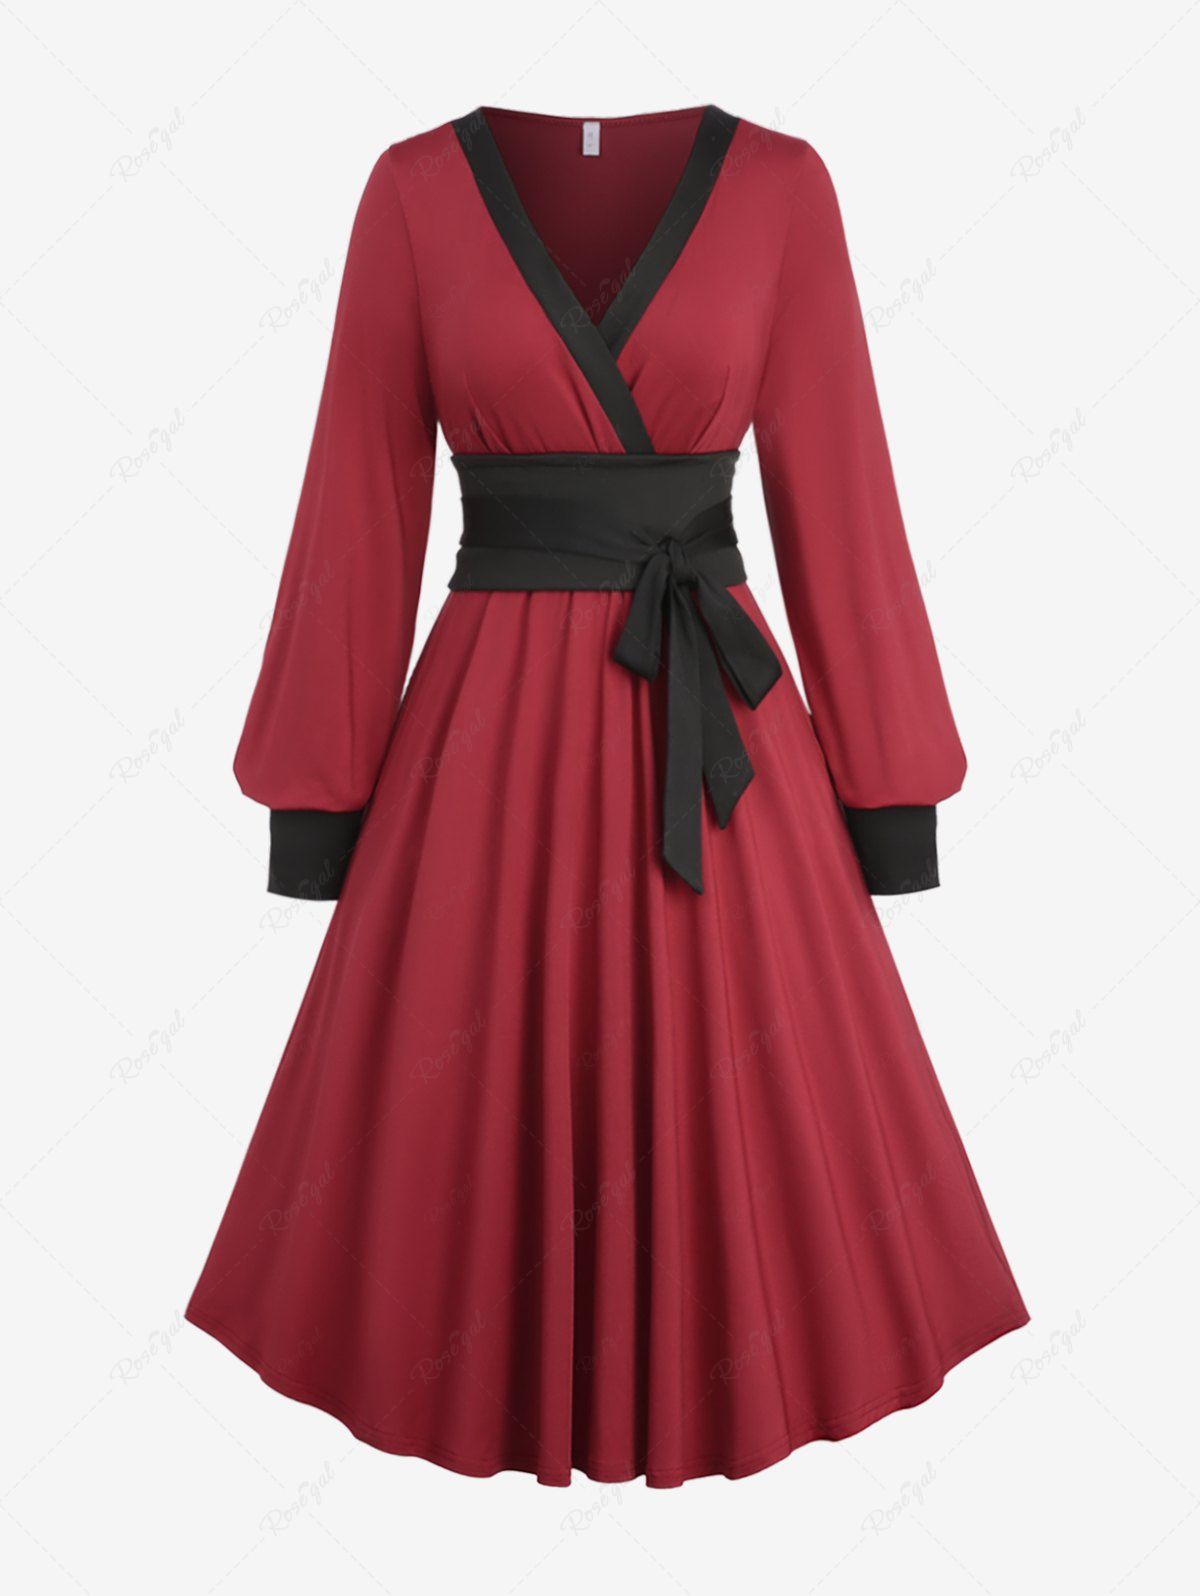 Fancy Plus Size Surplice Ruffles Bishop Sleeve A Line Chinese Style Dress with Bowknot Tie Belt  